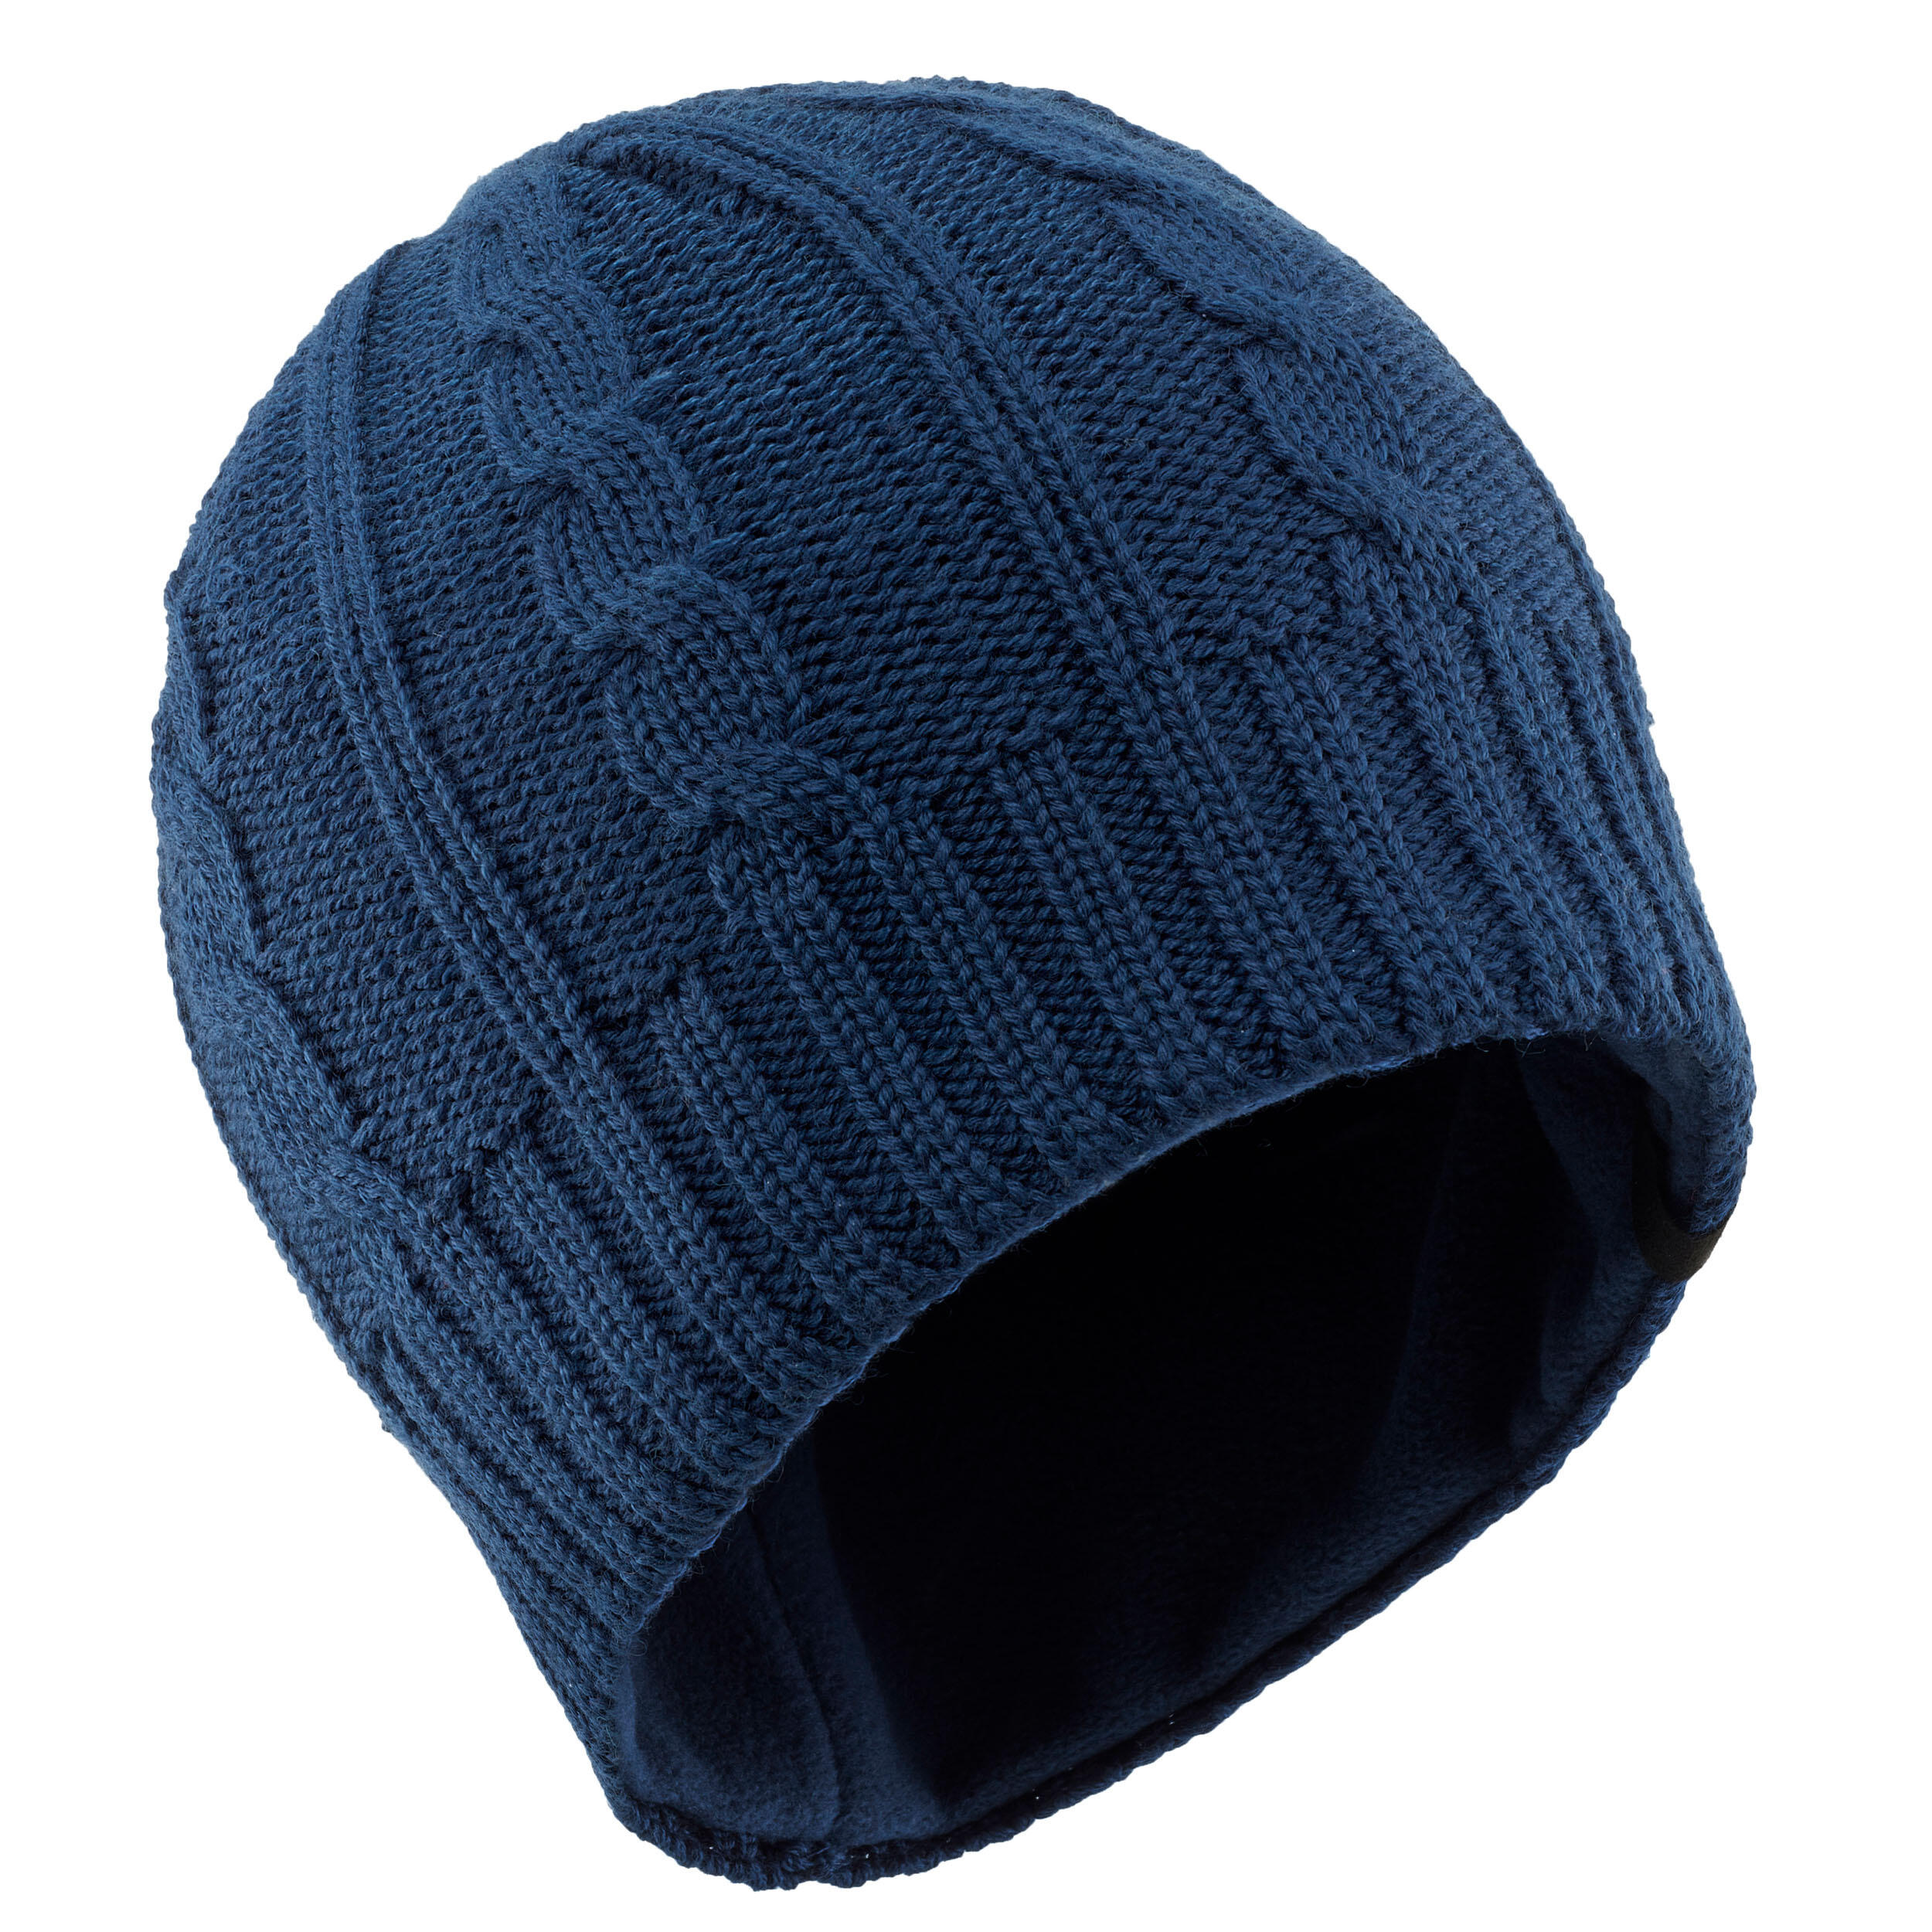 Cable-knit ski hat - Kids - WEDZE